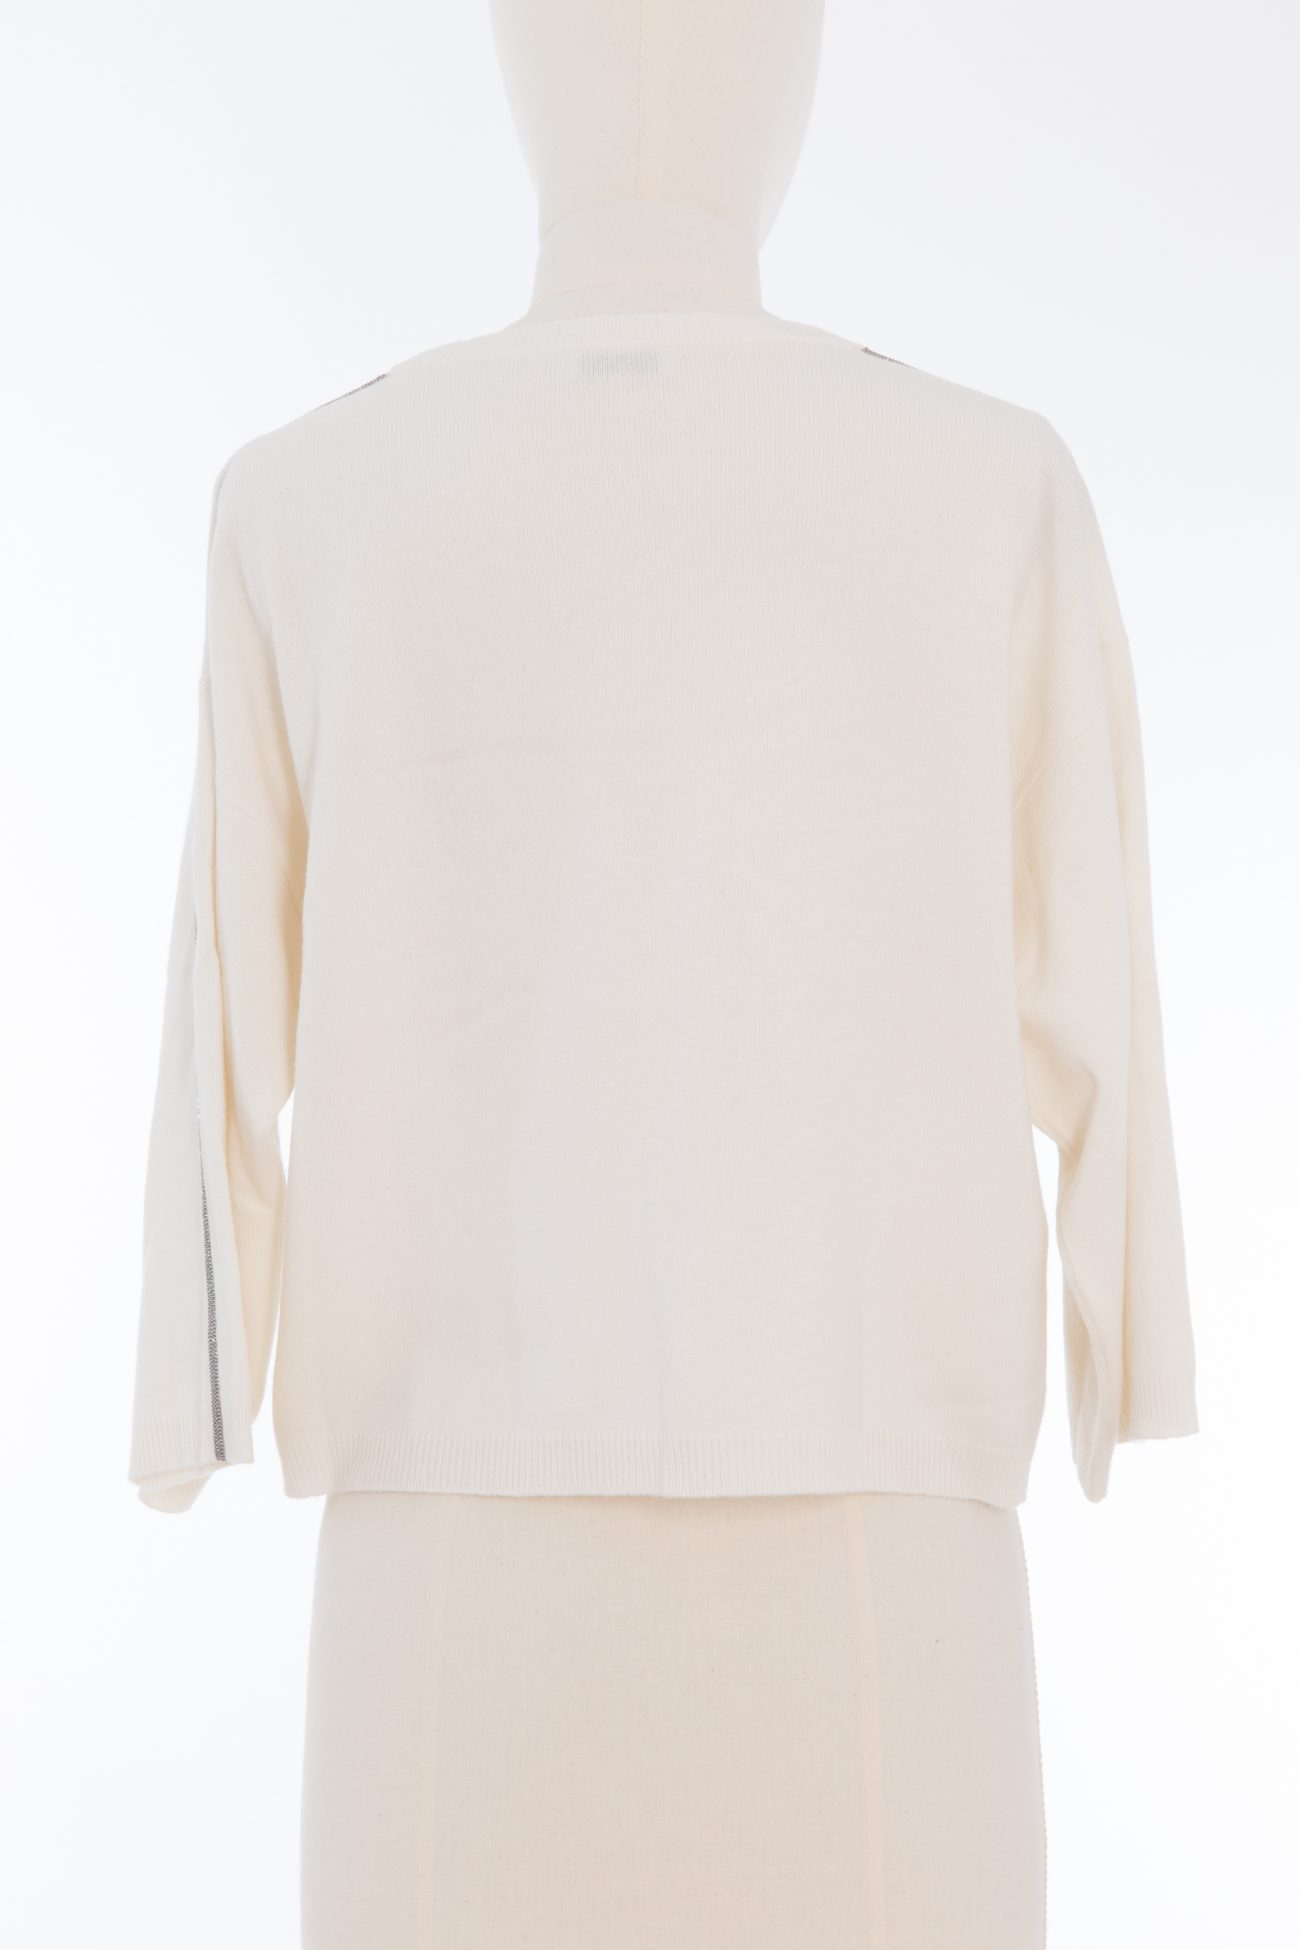 Brunello Cucinelli bead-embellished cashmere and wool-blend cropped sweater